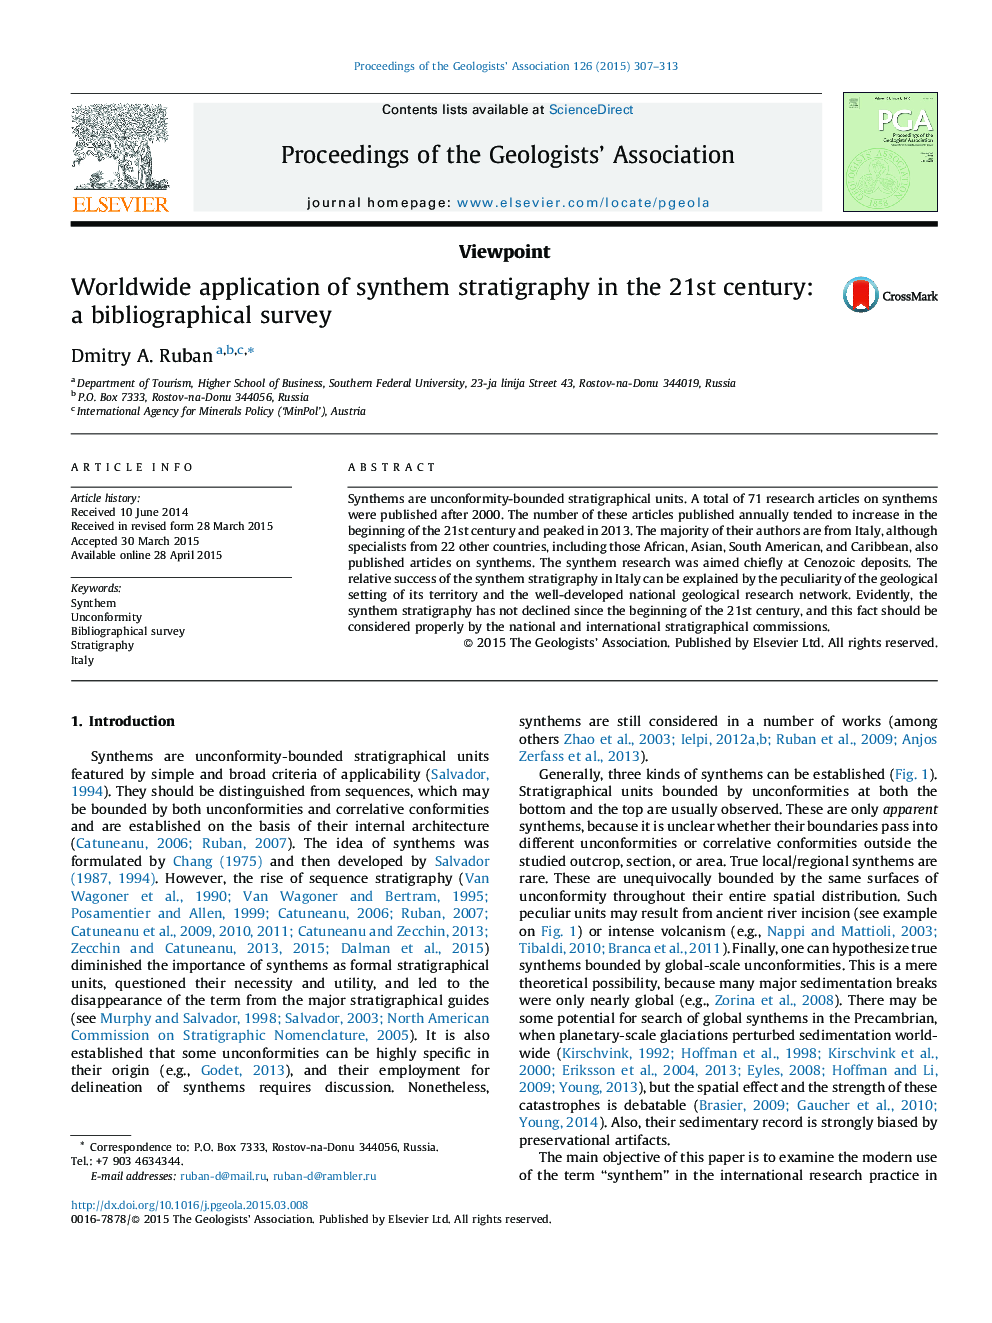 Worldwide application of synthem stratigraphy in the 21st century: a bibliographical survey